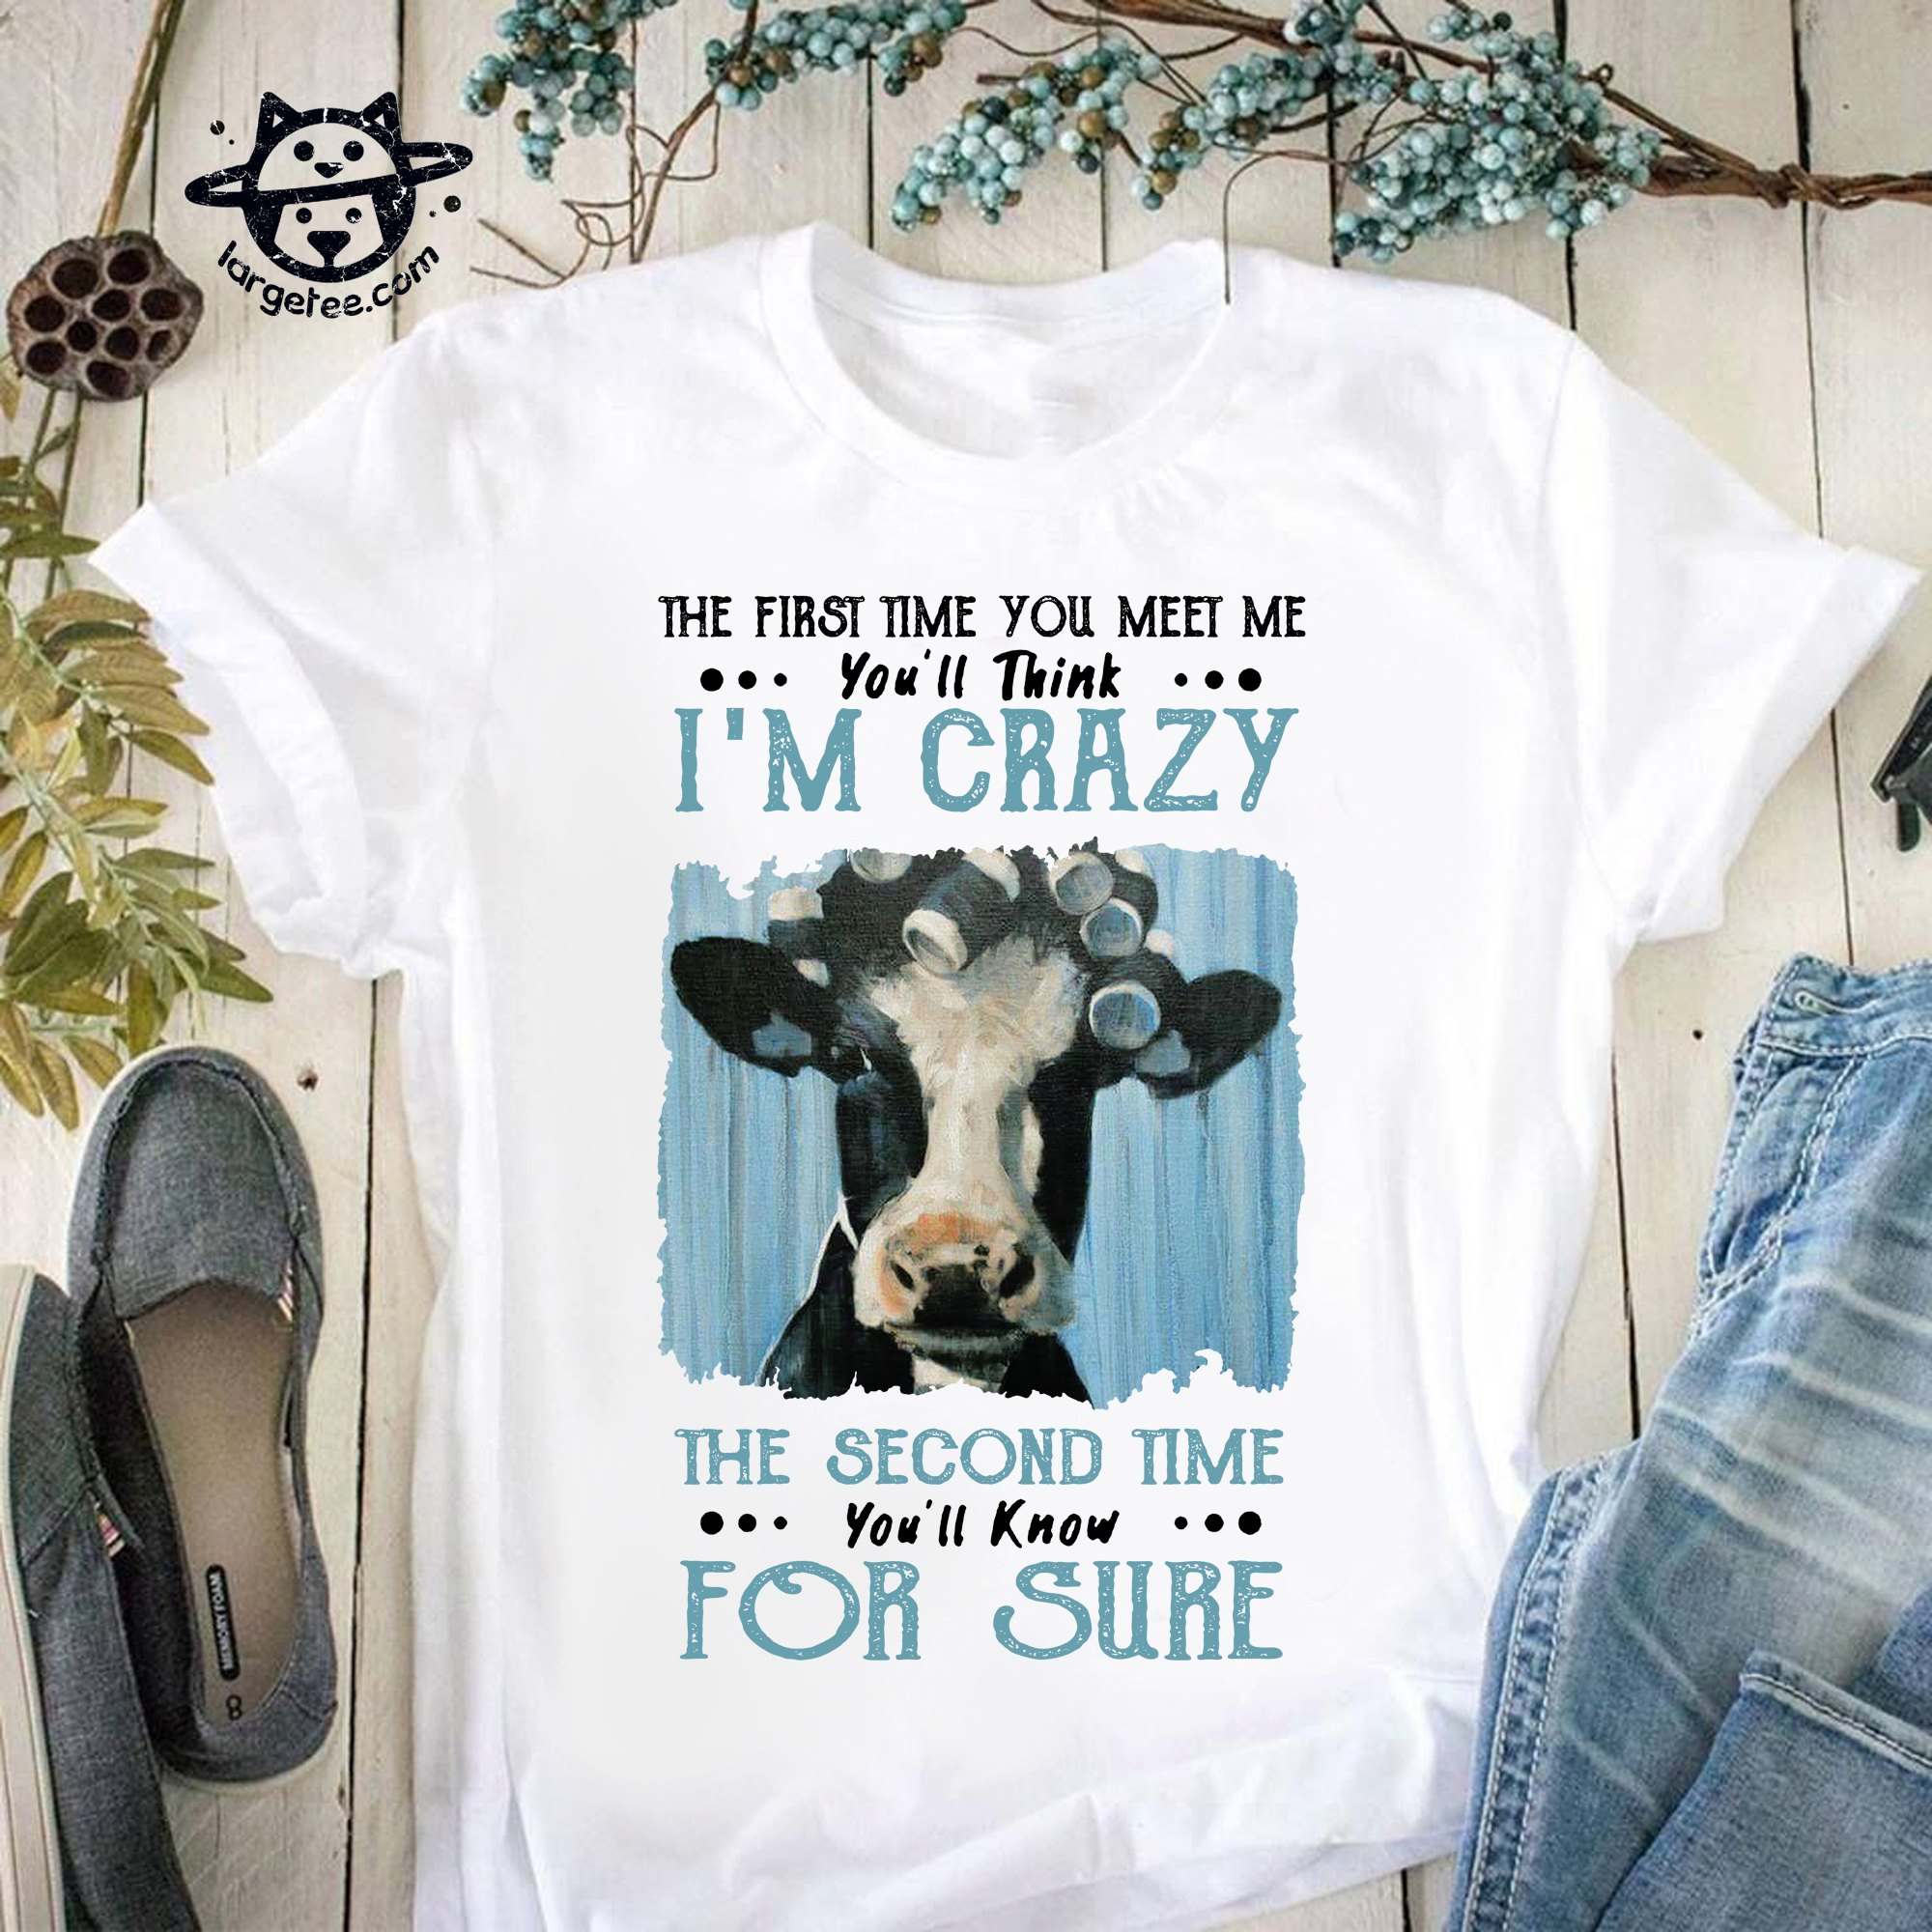 The first time you meet me you'll think I'm crazy - Grumpy milk cow